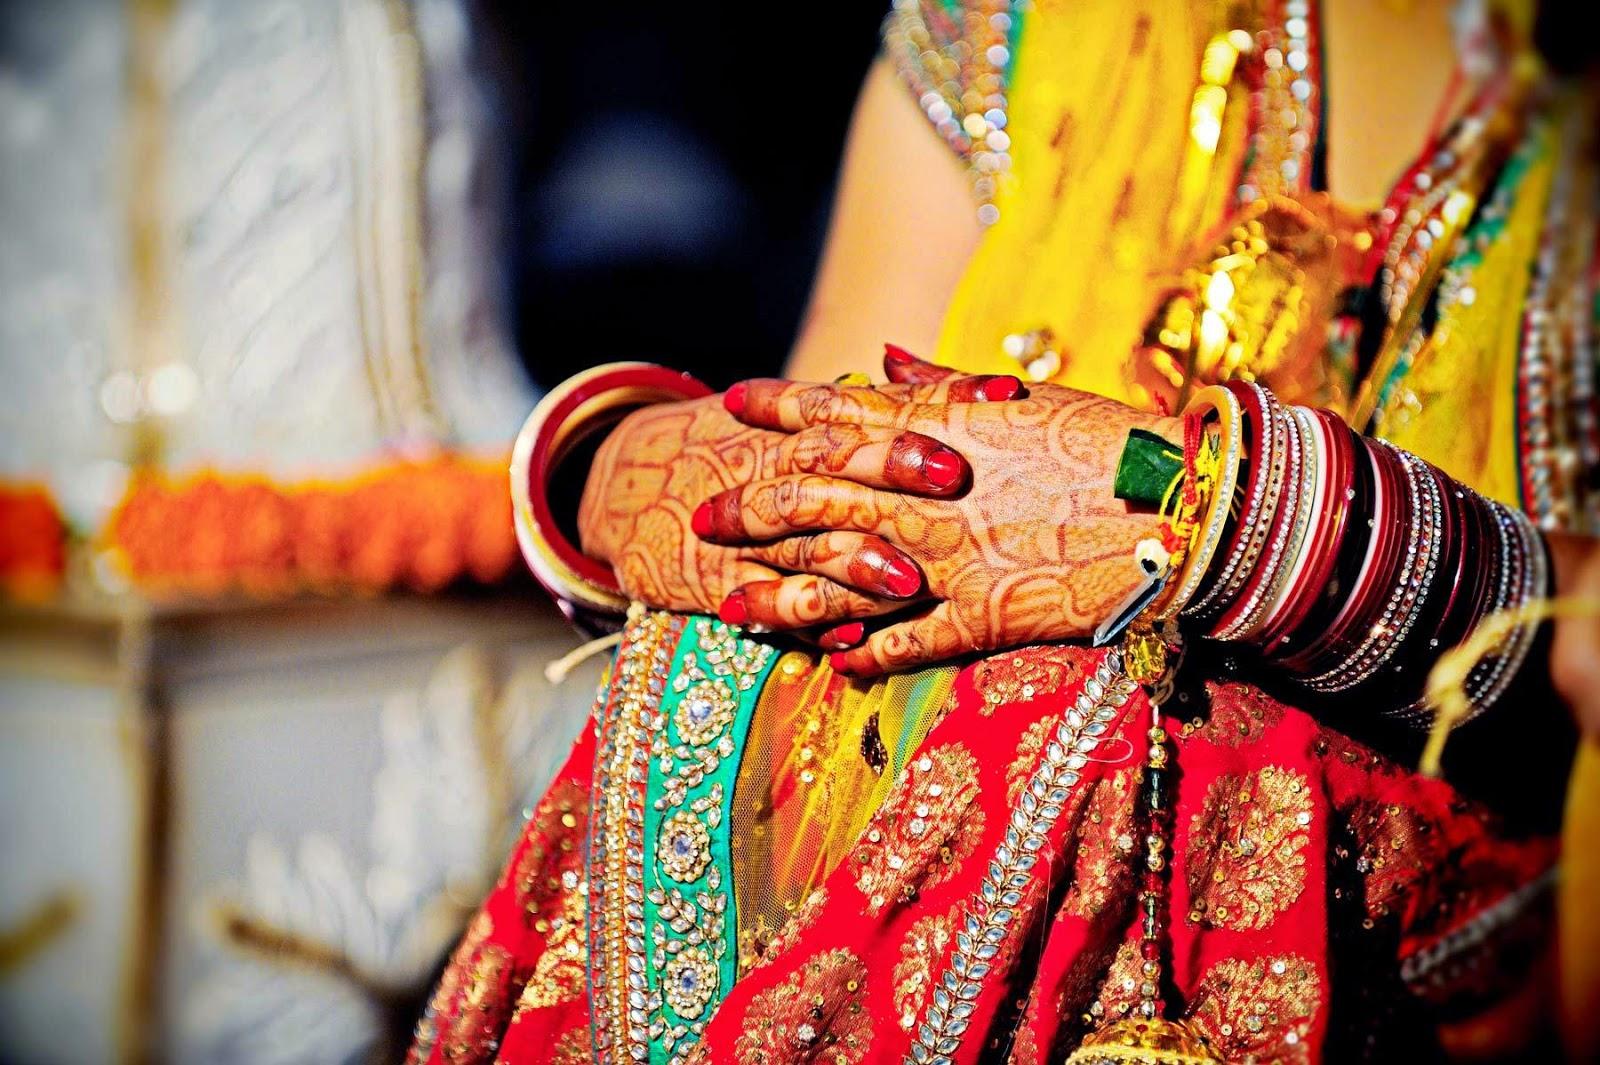 Vachan, 7 Promises in traditional Indian wedding